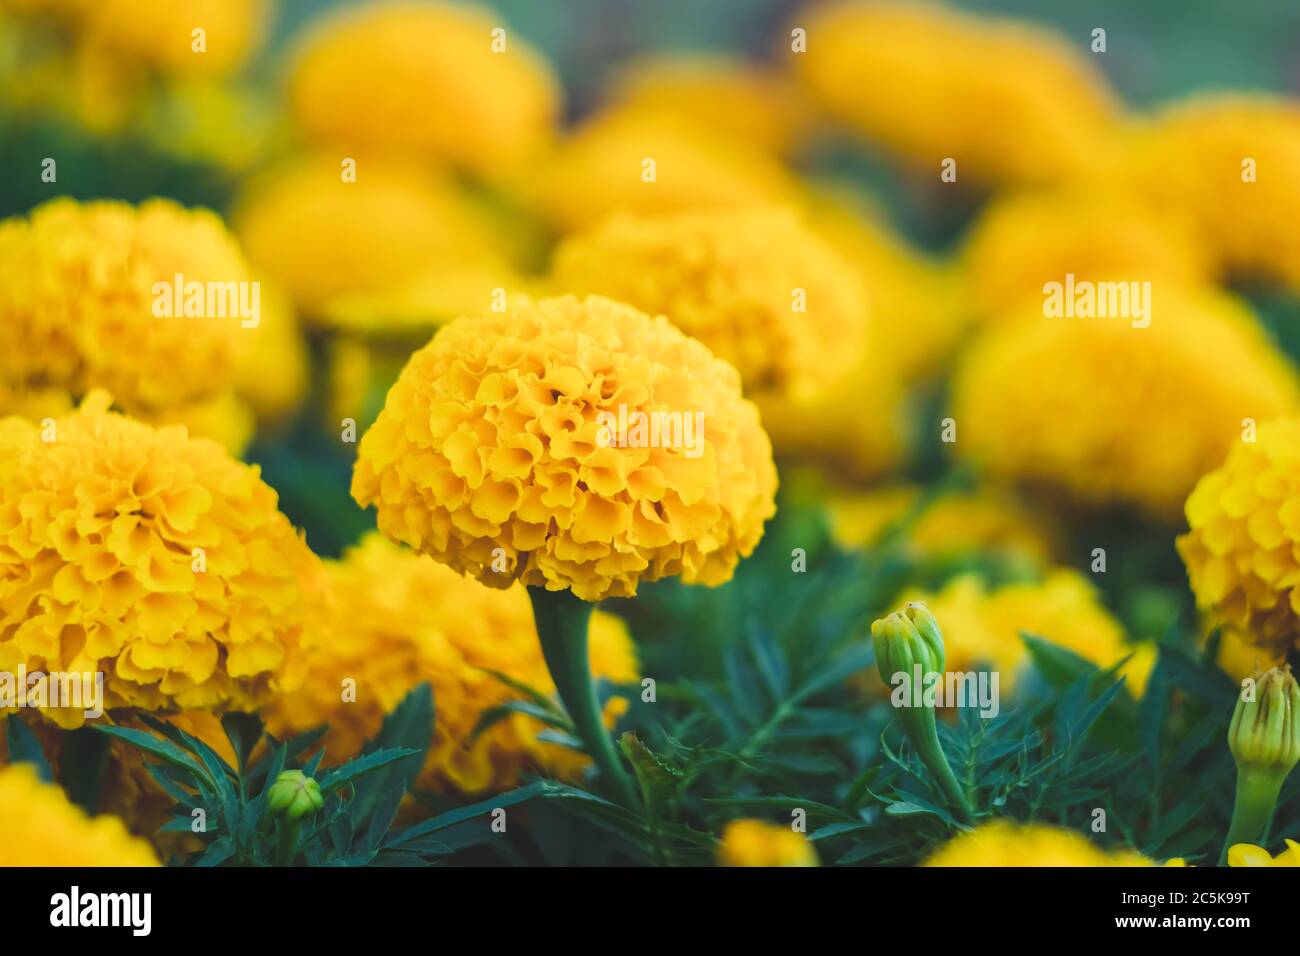 Field of yellow marigolds, bright flowers in the garden. Floral wallpaper,  nature background. Tagetes erecta, African calendula from the sunflower fam  Stock Photo - Alamy